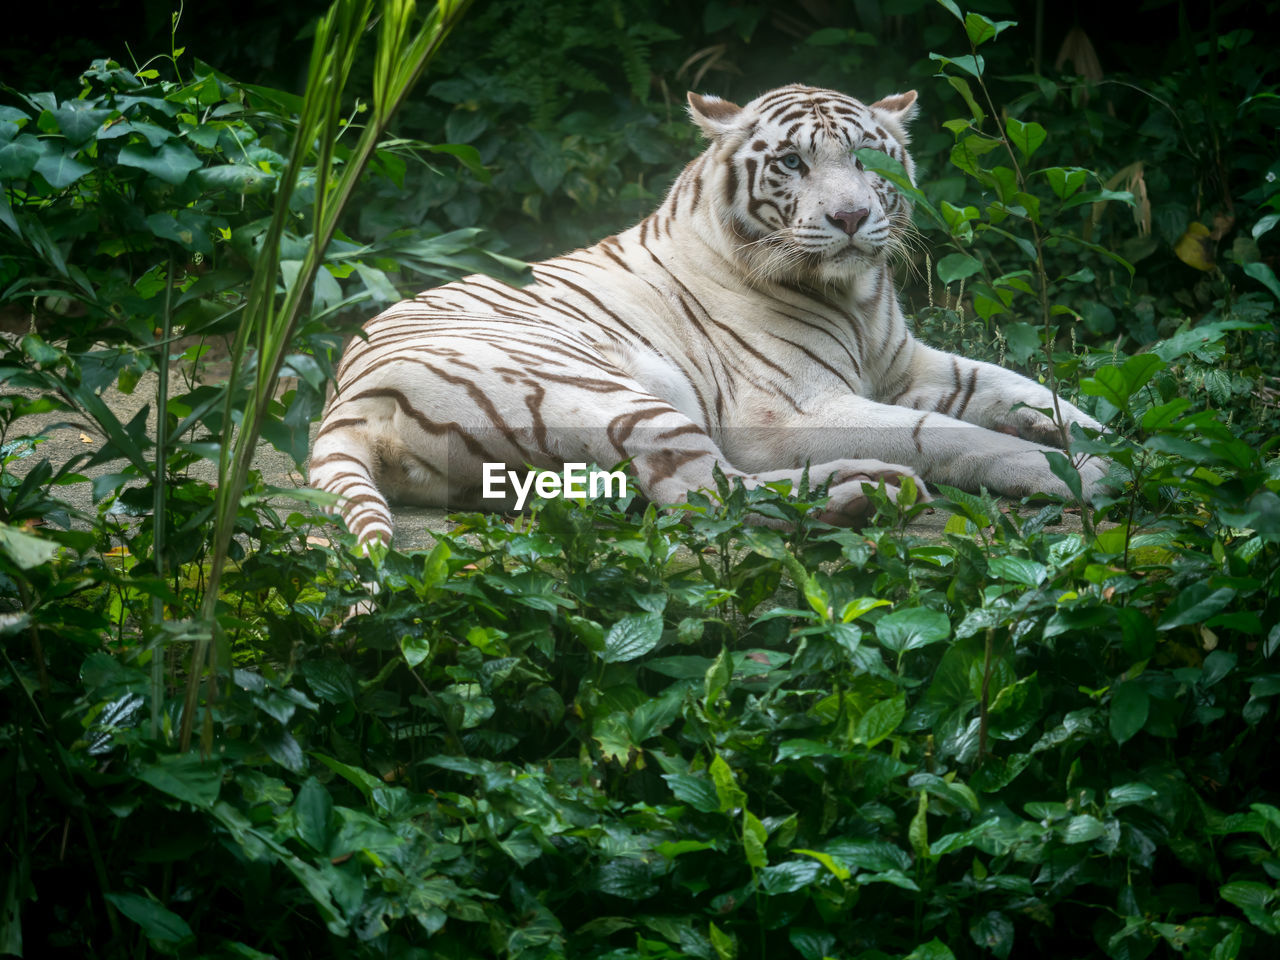 TIGER BY PLANTS